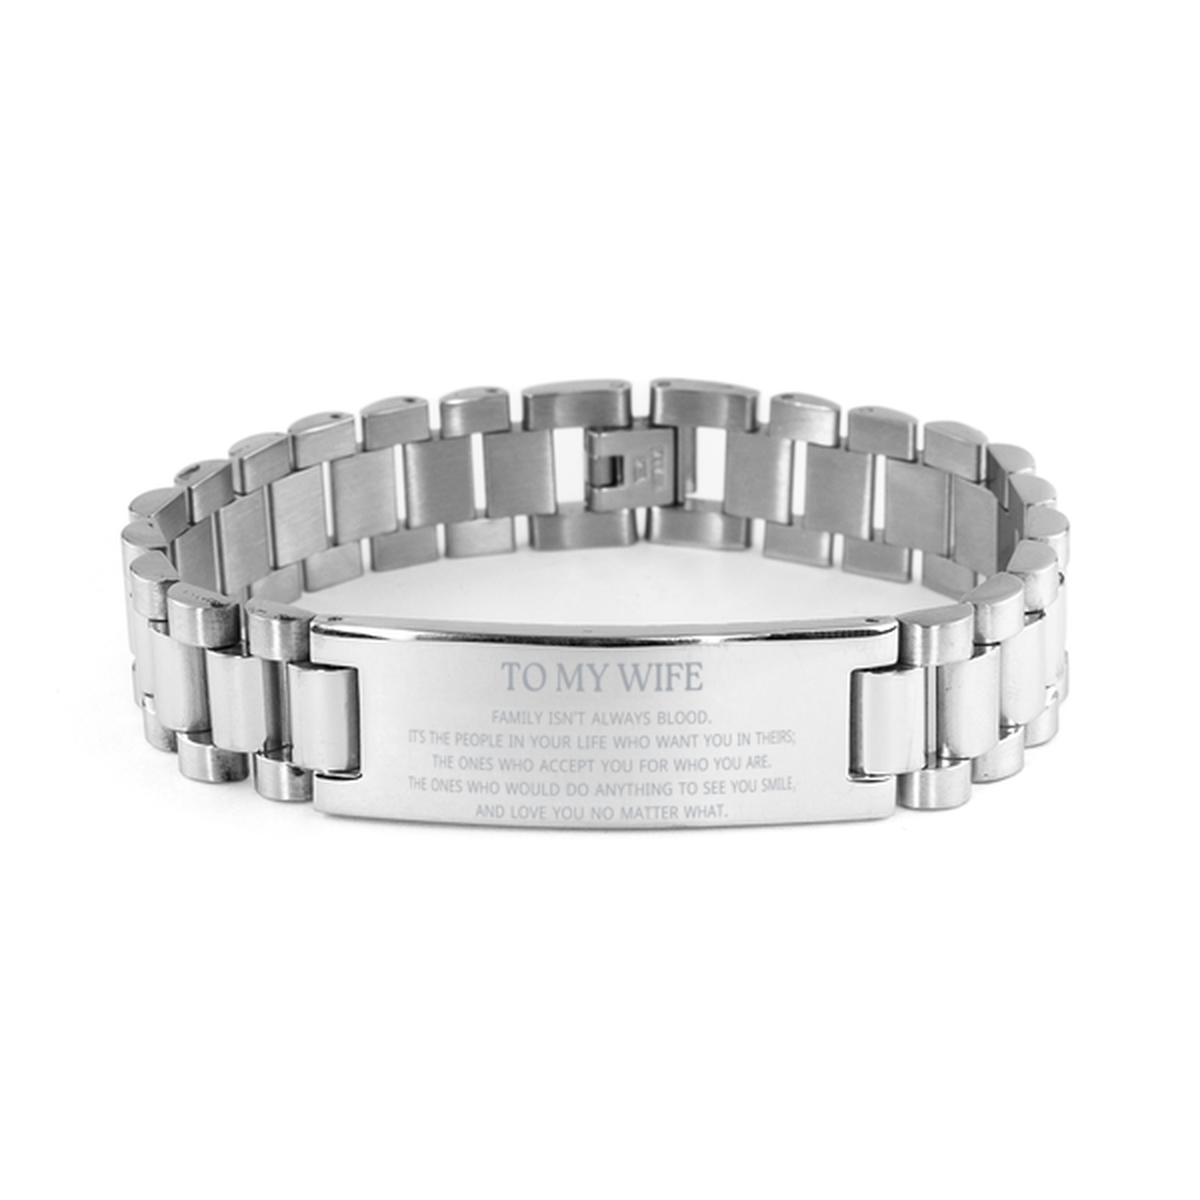 To My Wife Gifts, Family isn't always blood, Wife Ladder Stainless Steel Bracelet, Birthday Christmas Unique Present For Wife